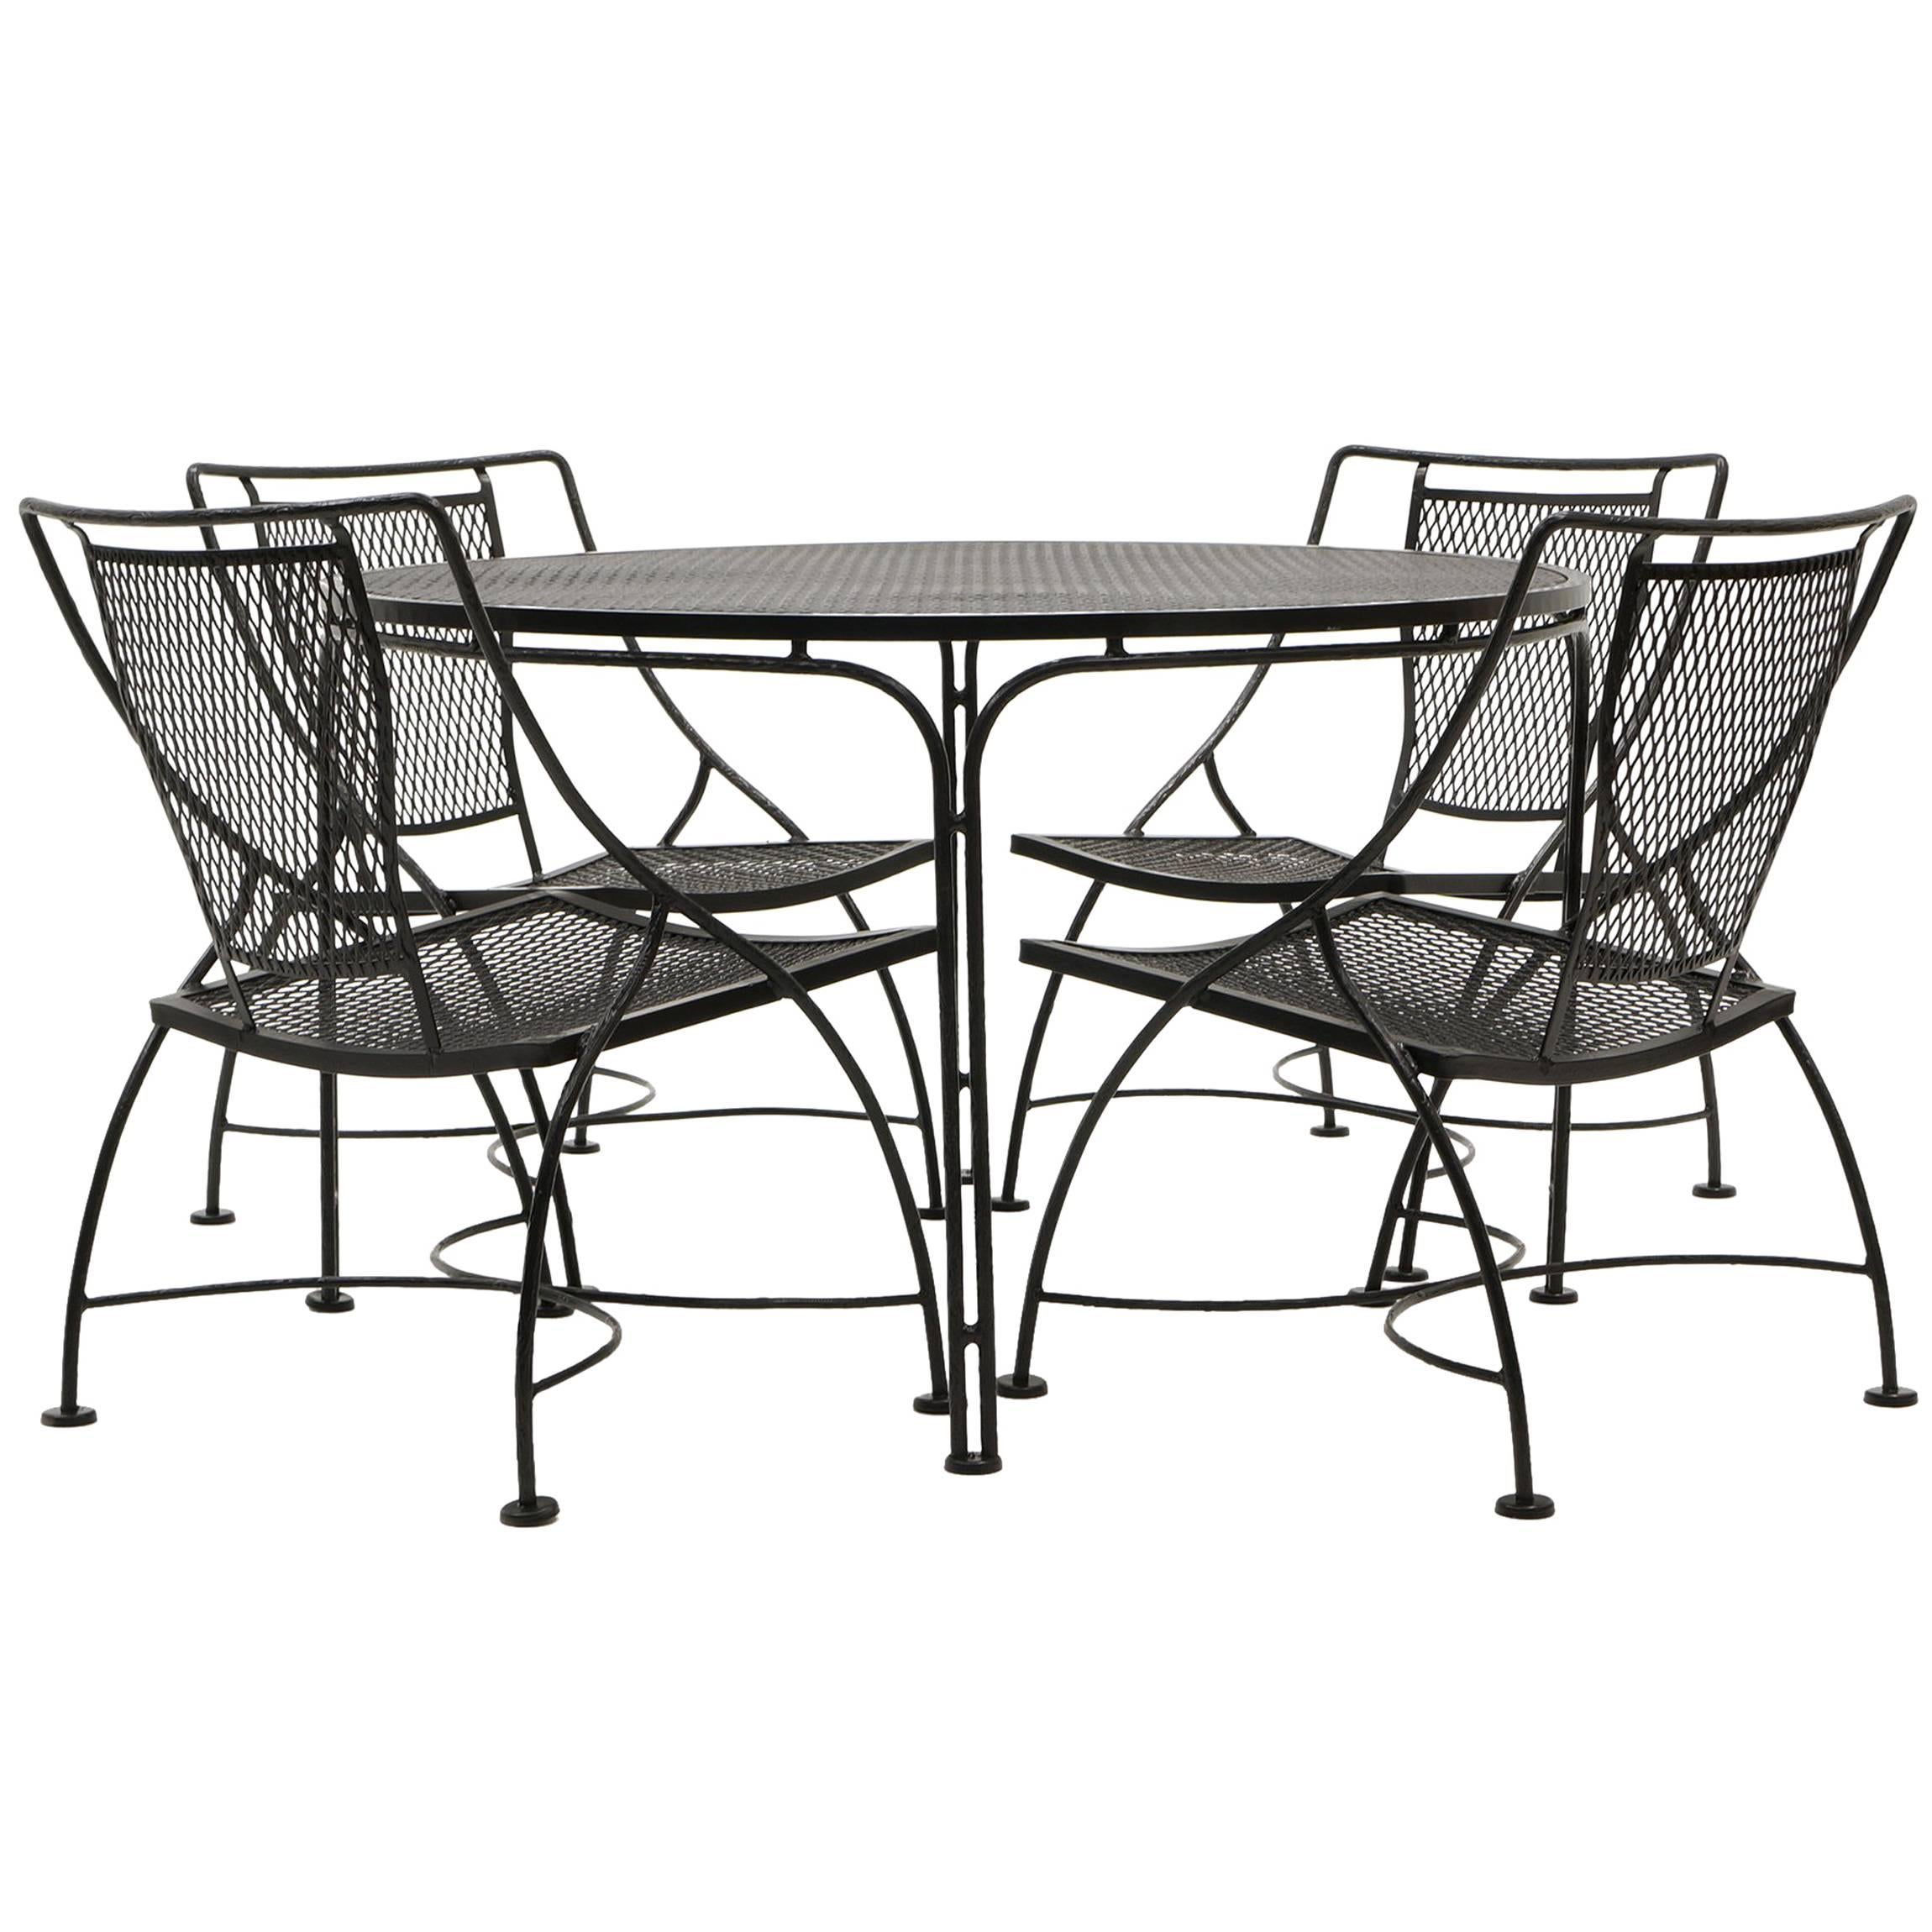 John Salterini Lounge Height Patio Table and Four Chairs, Expertly Restored